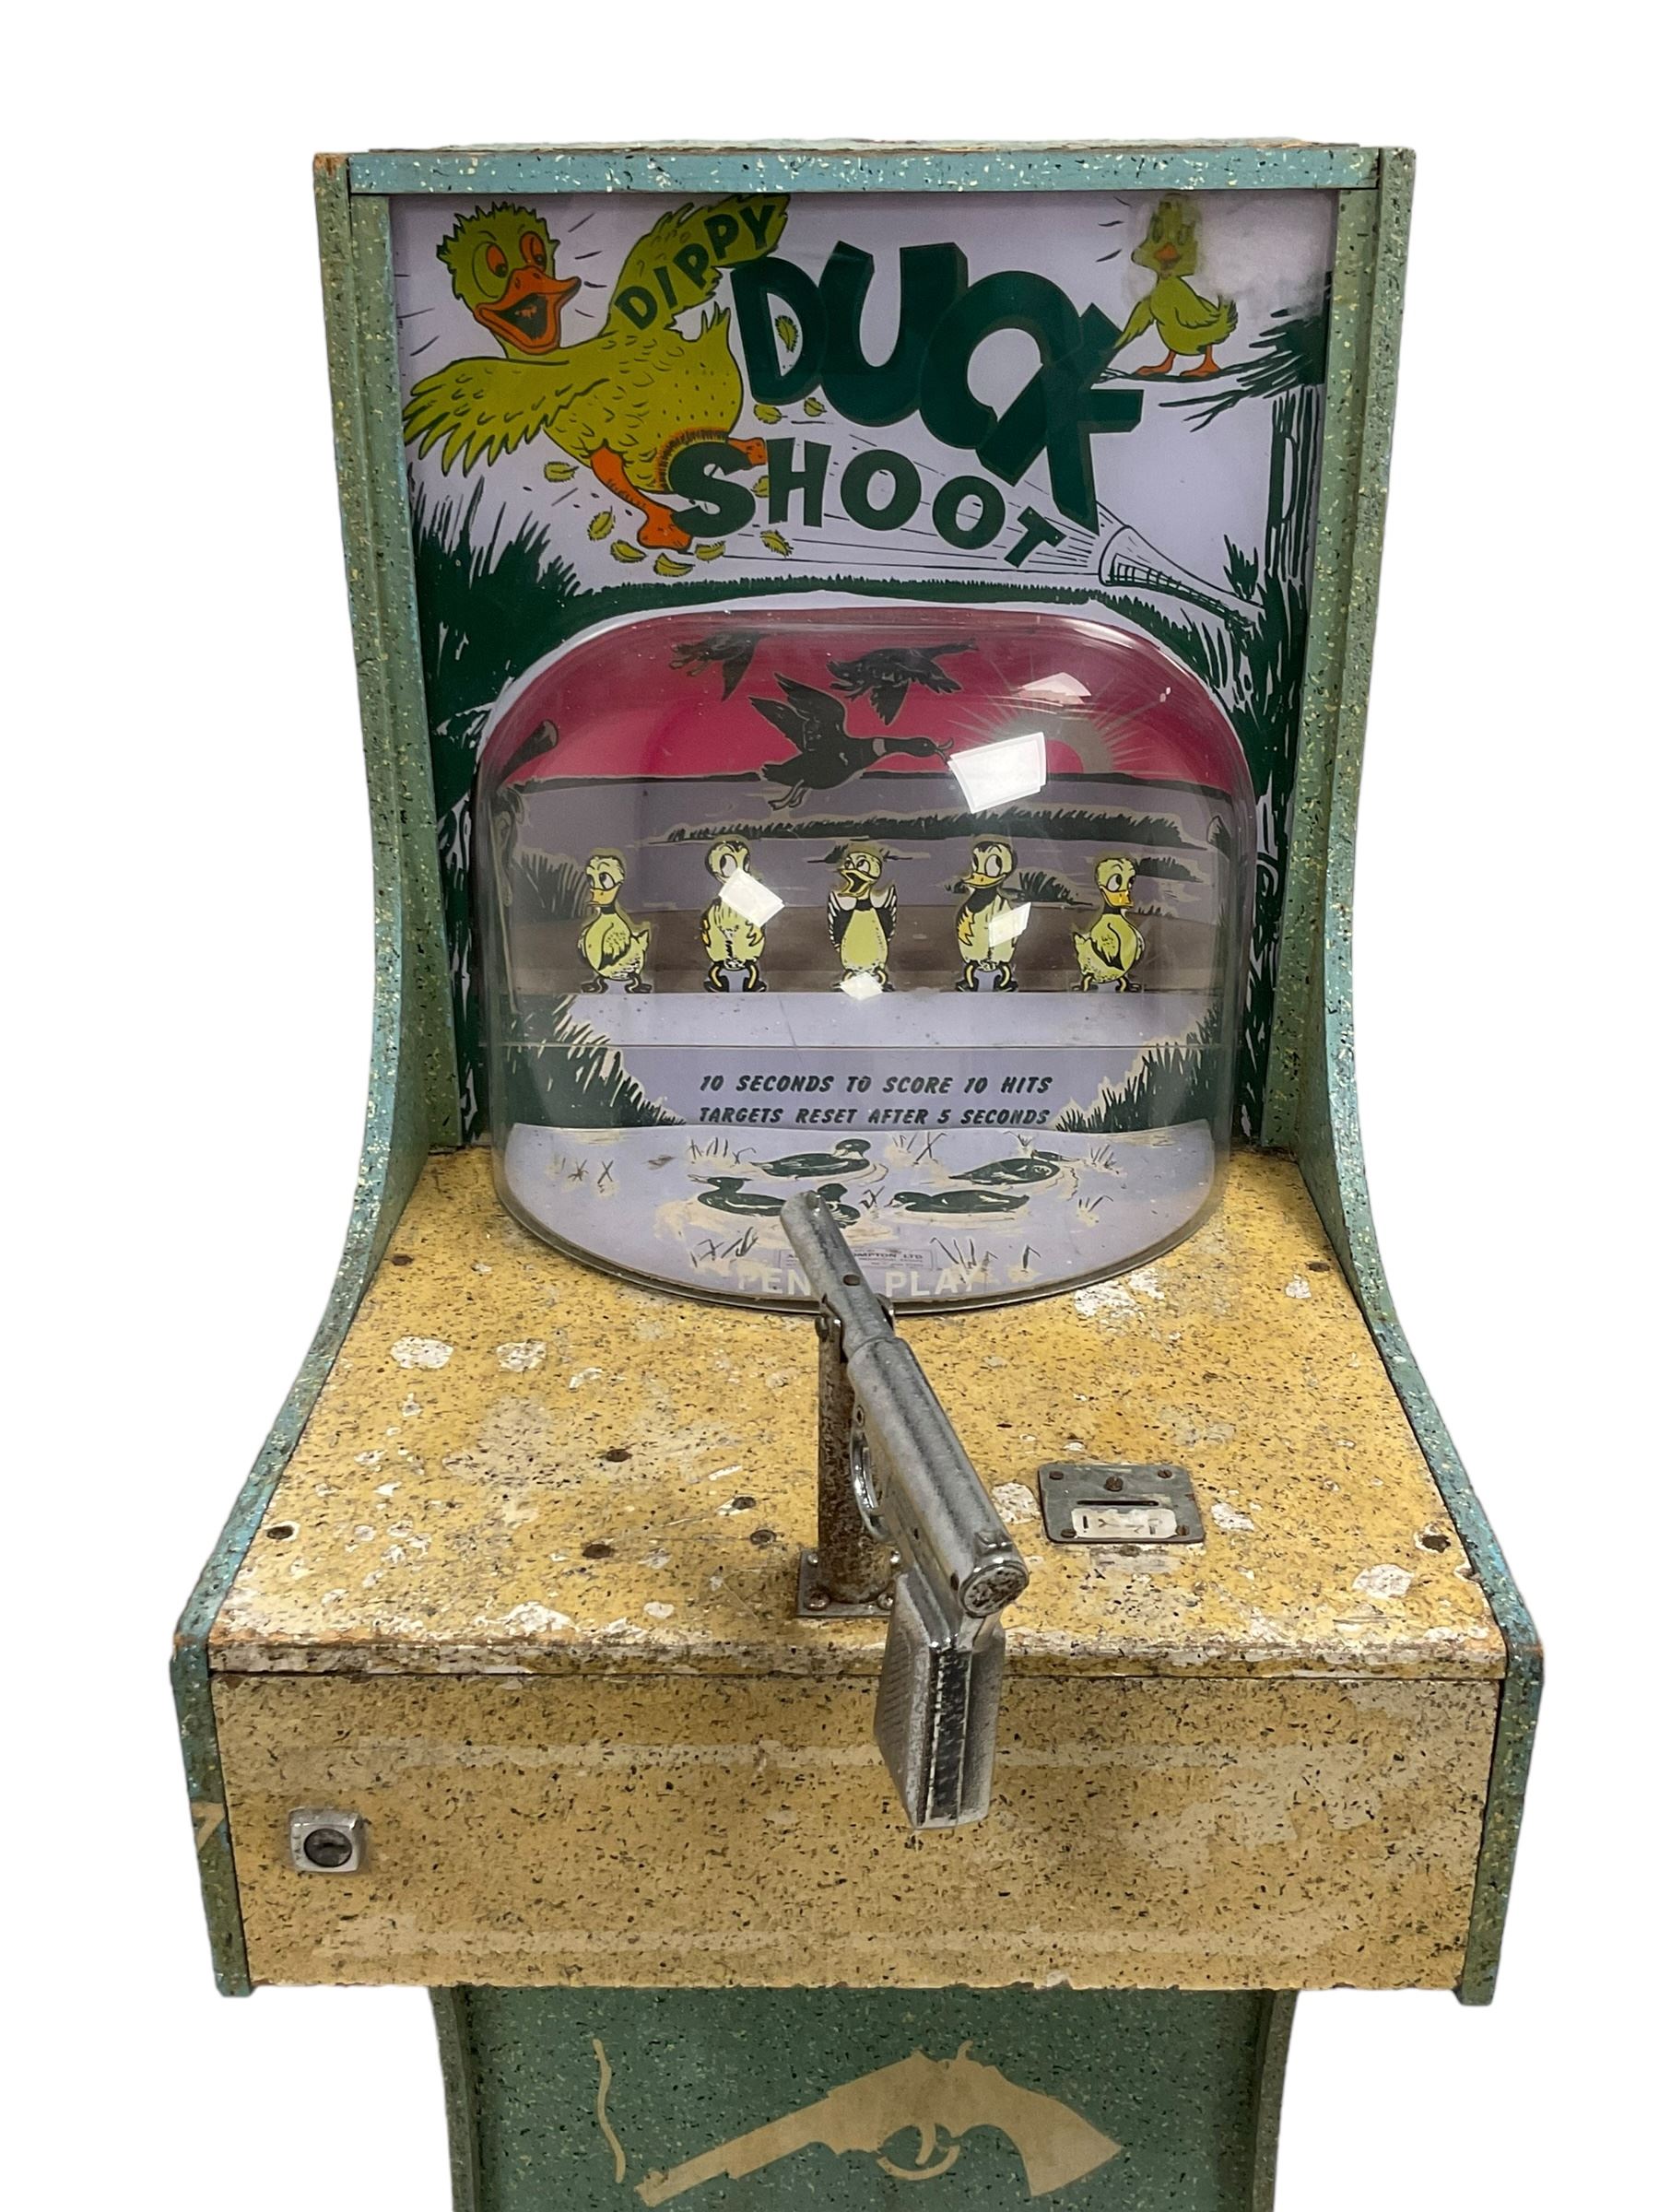 Early 1960s 'Dippy Duck Shoot' upright coin-operated arcade machine - Image 7 of 9